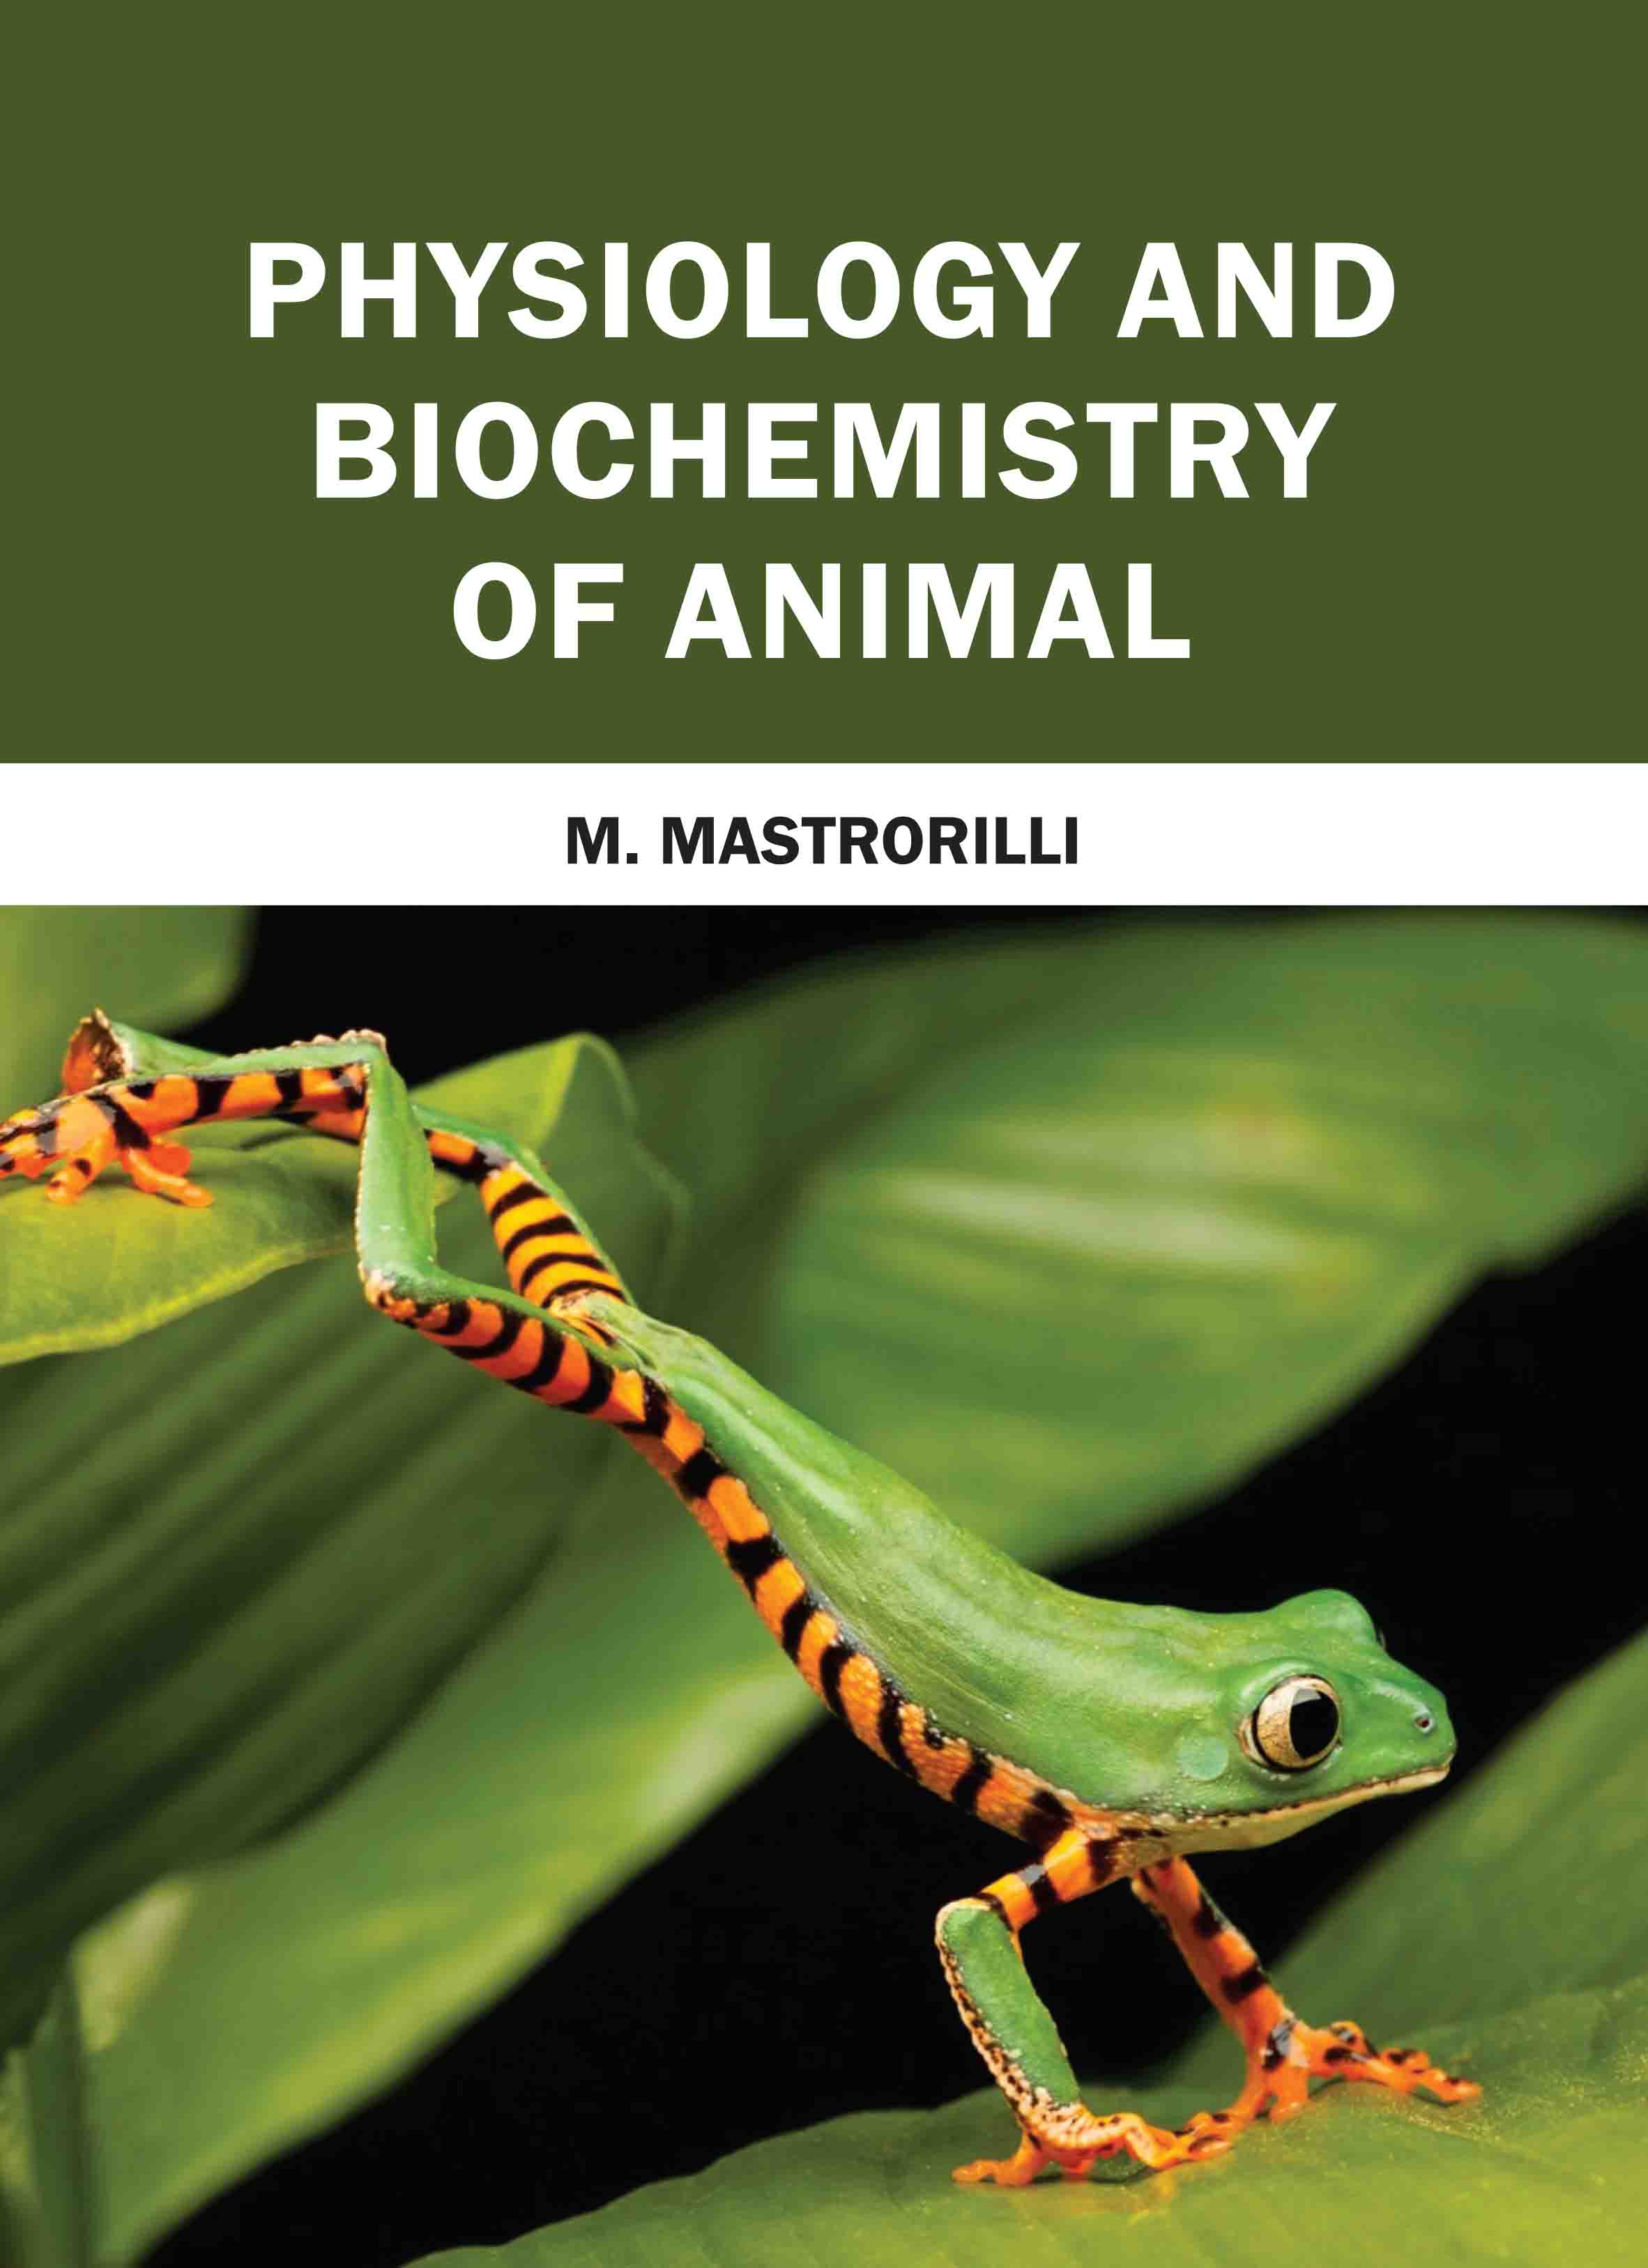 Physiology and Biochemistry of Animal